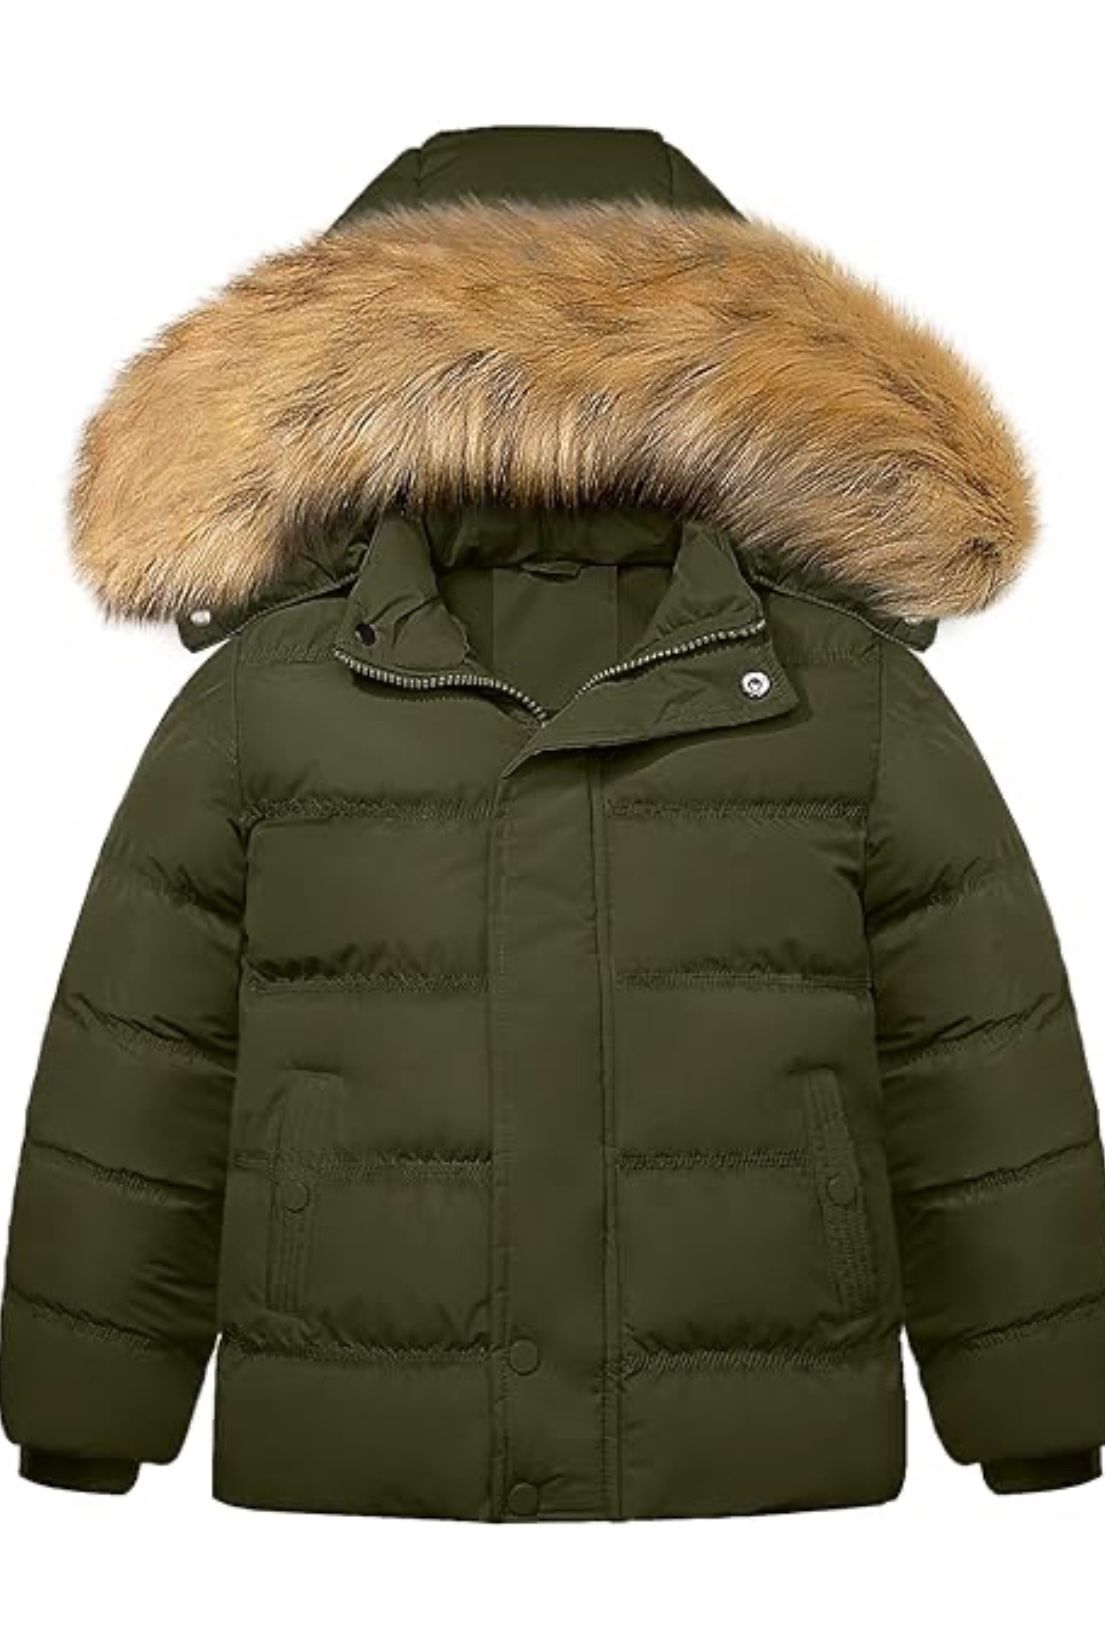 Szory Boy's Thicken Parka Coat Winter Warm Jacket with Removable Fur Hood